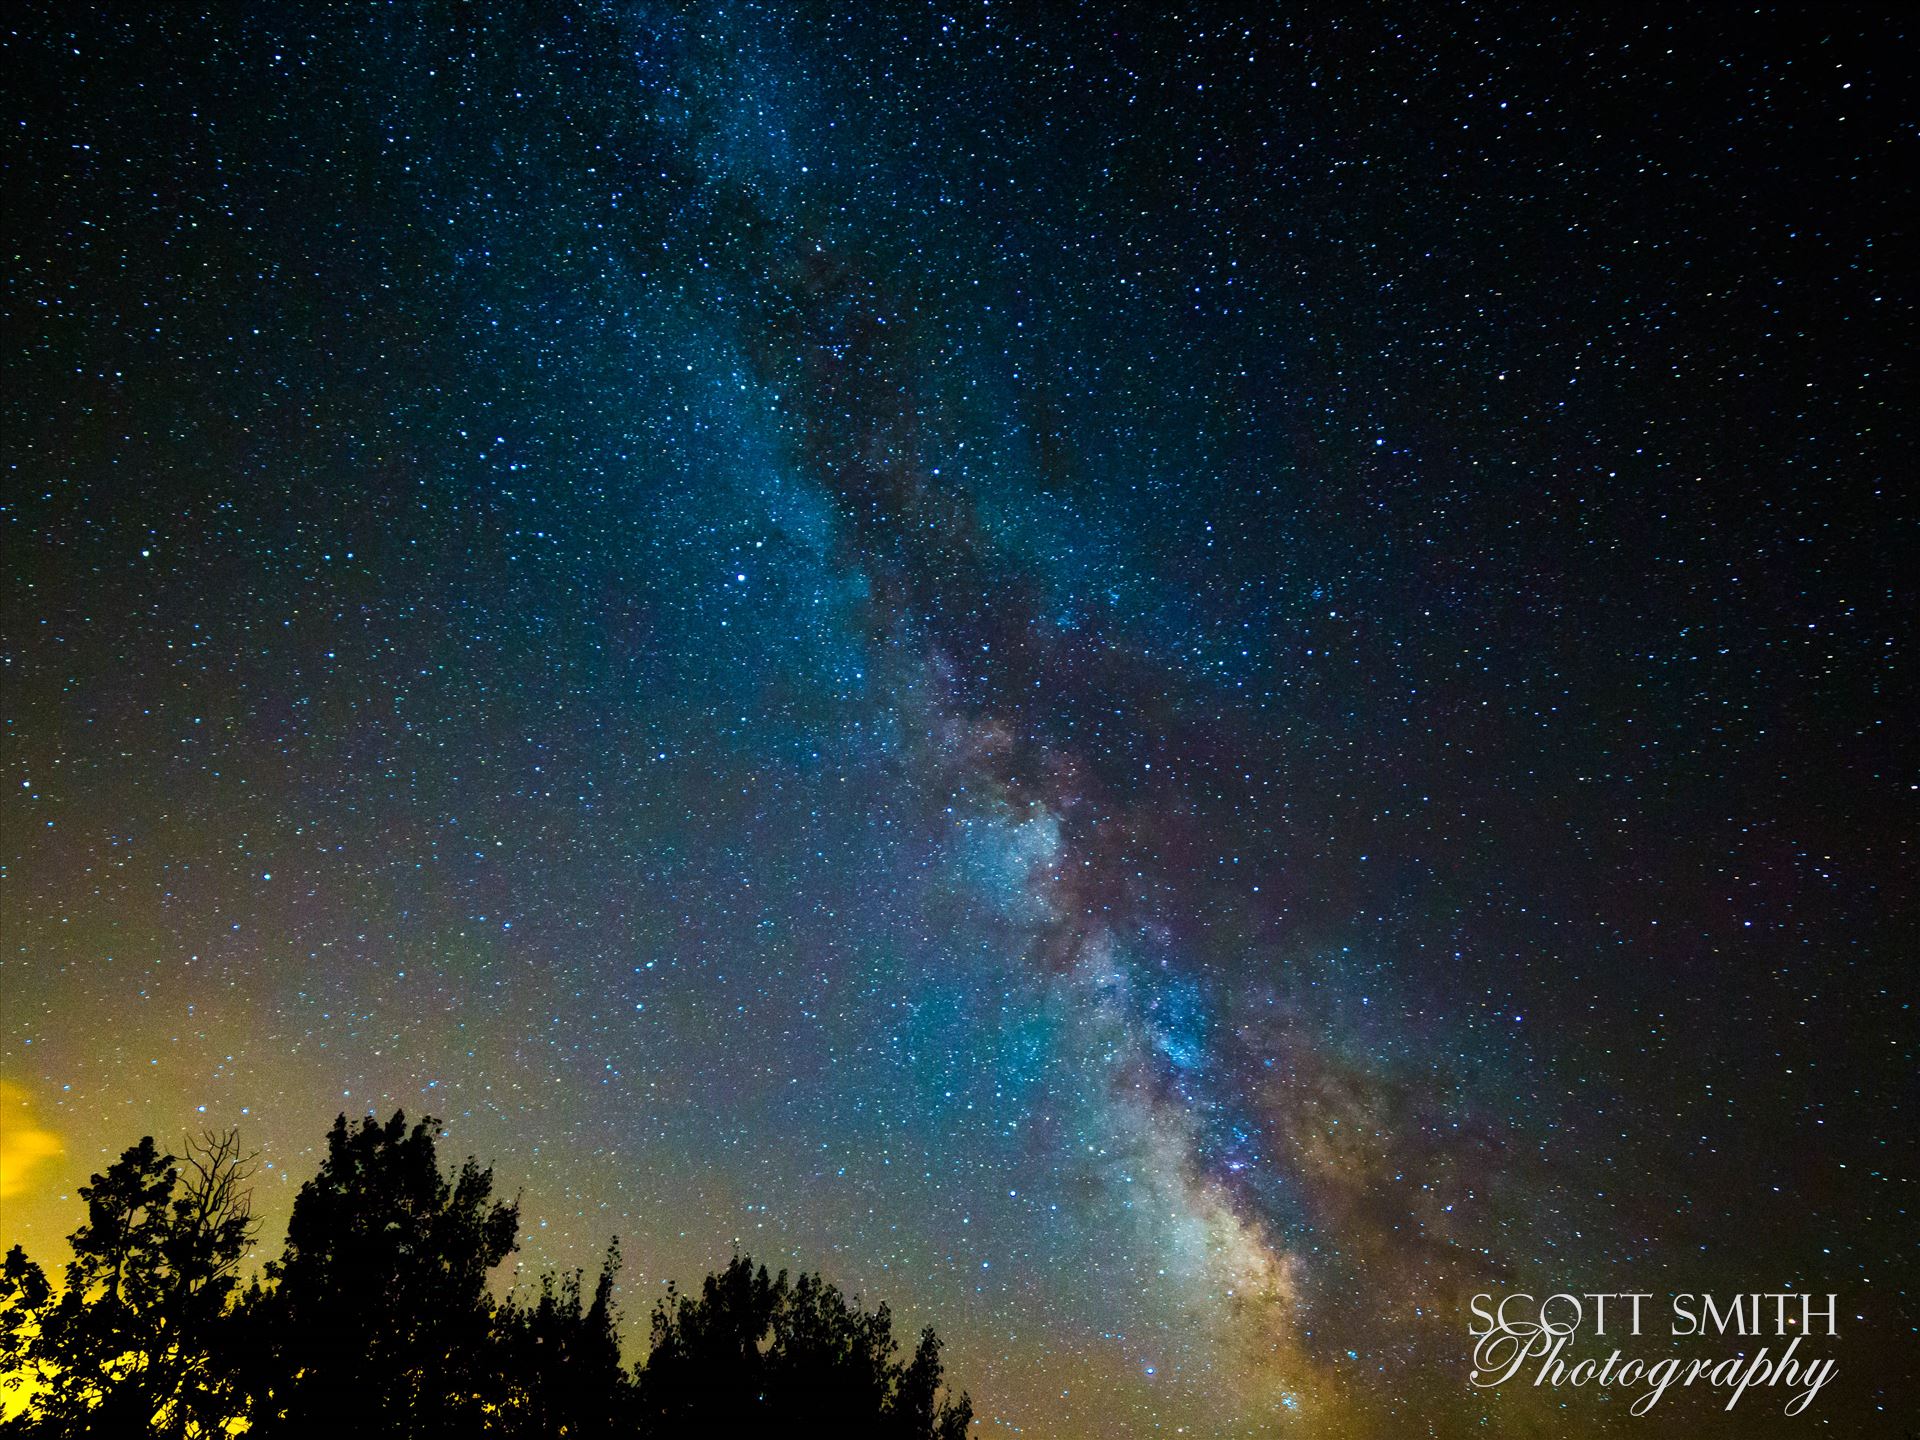 Milky Way from Ward II - The Milky Way during the 2015 Perseid meteor shower. by Scott Smith Photos